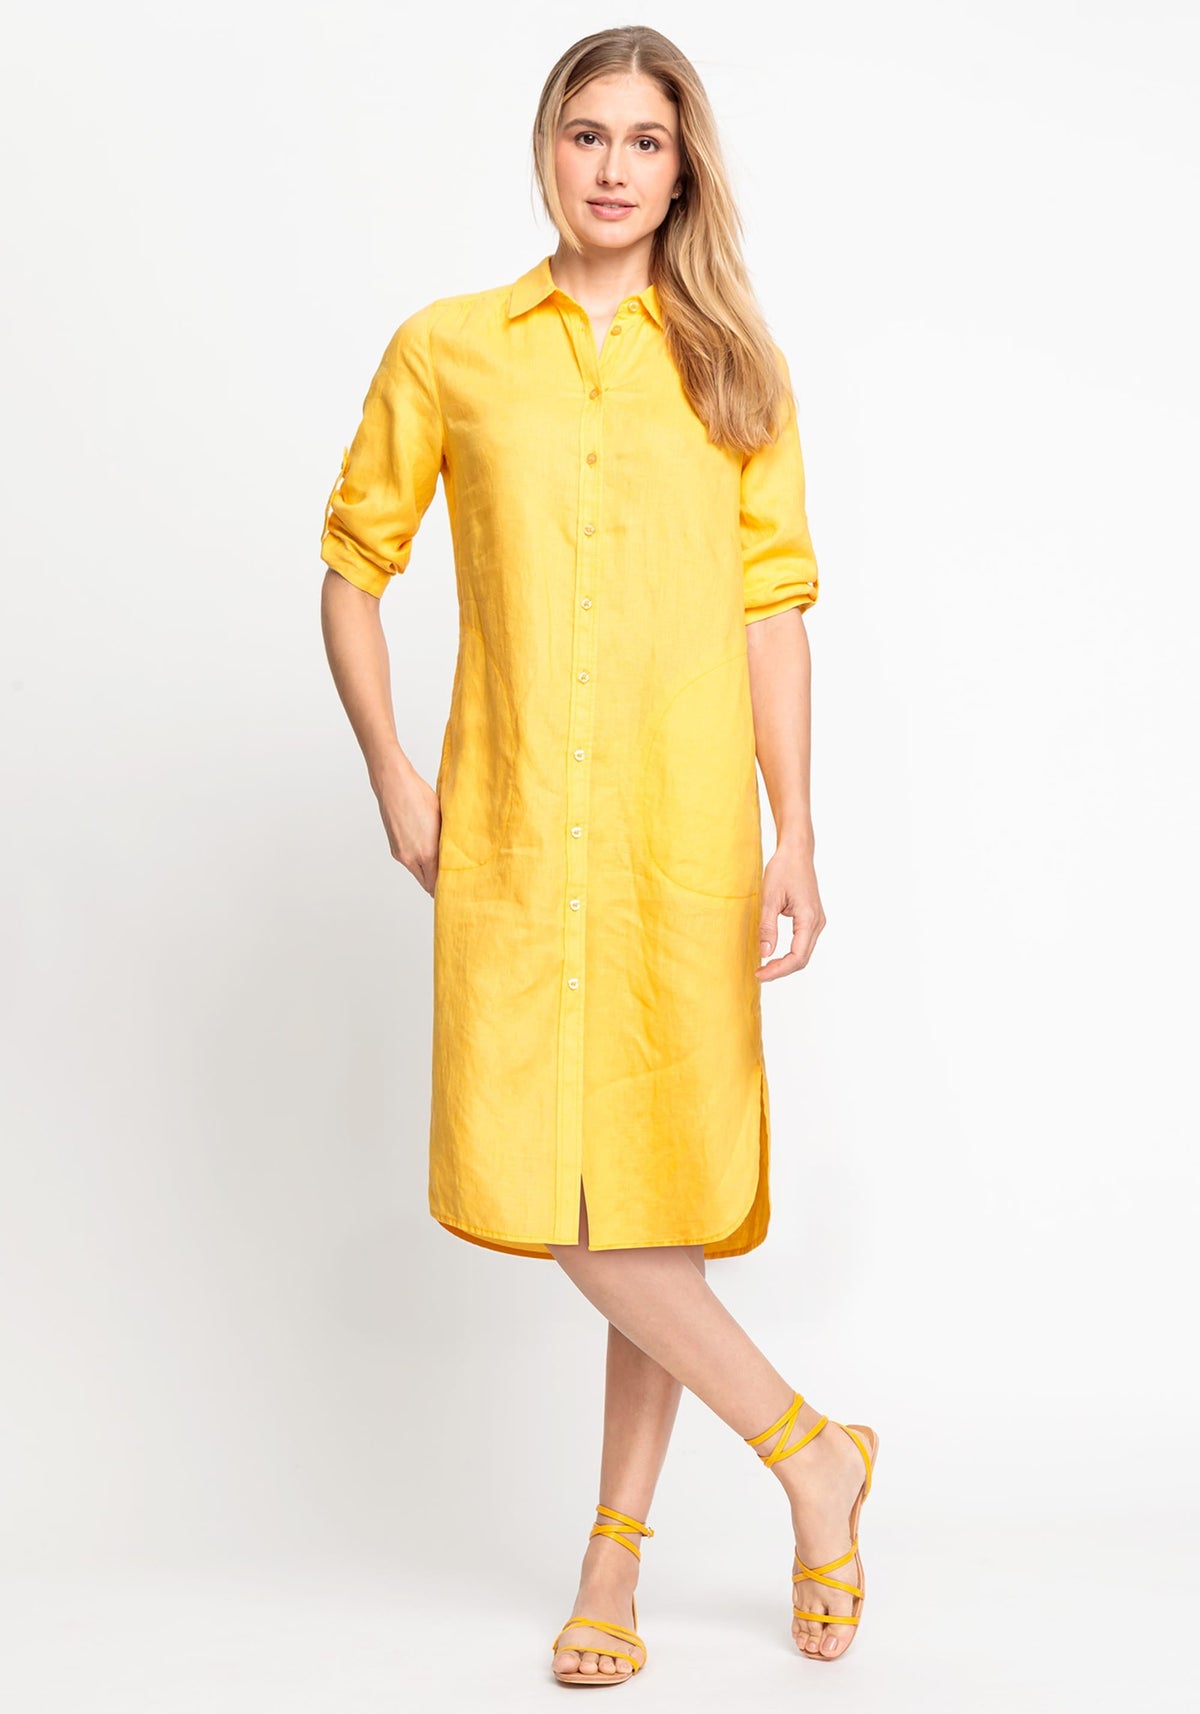 100% Linen 3/4 Sleeve Shirt Dress with Rolled Tab Sleeve Detail